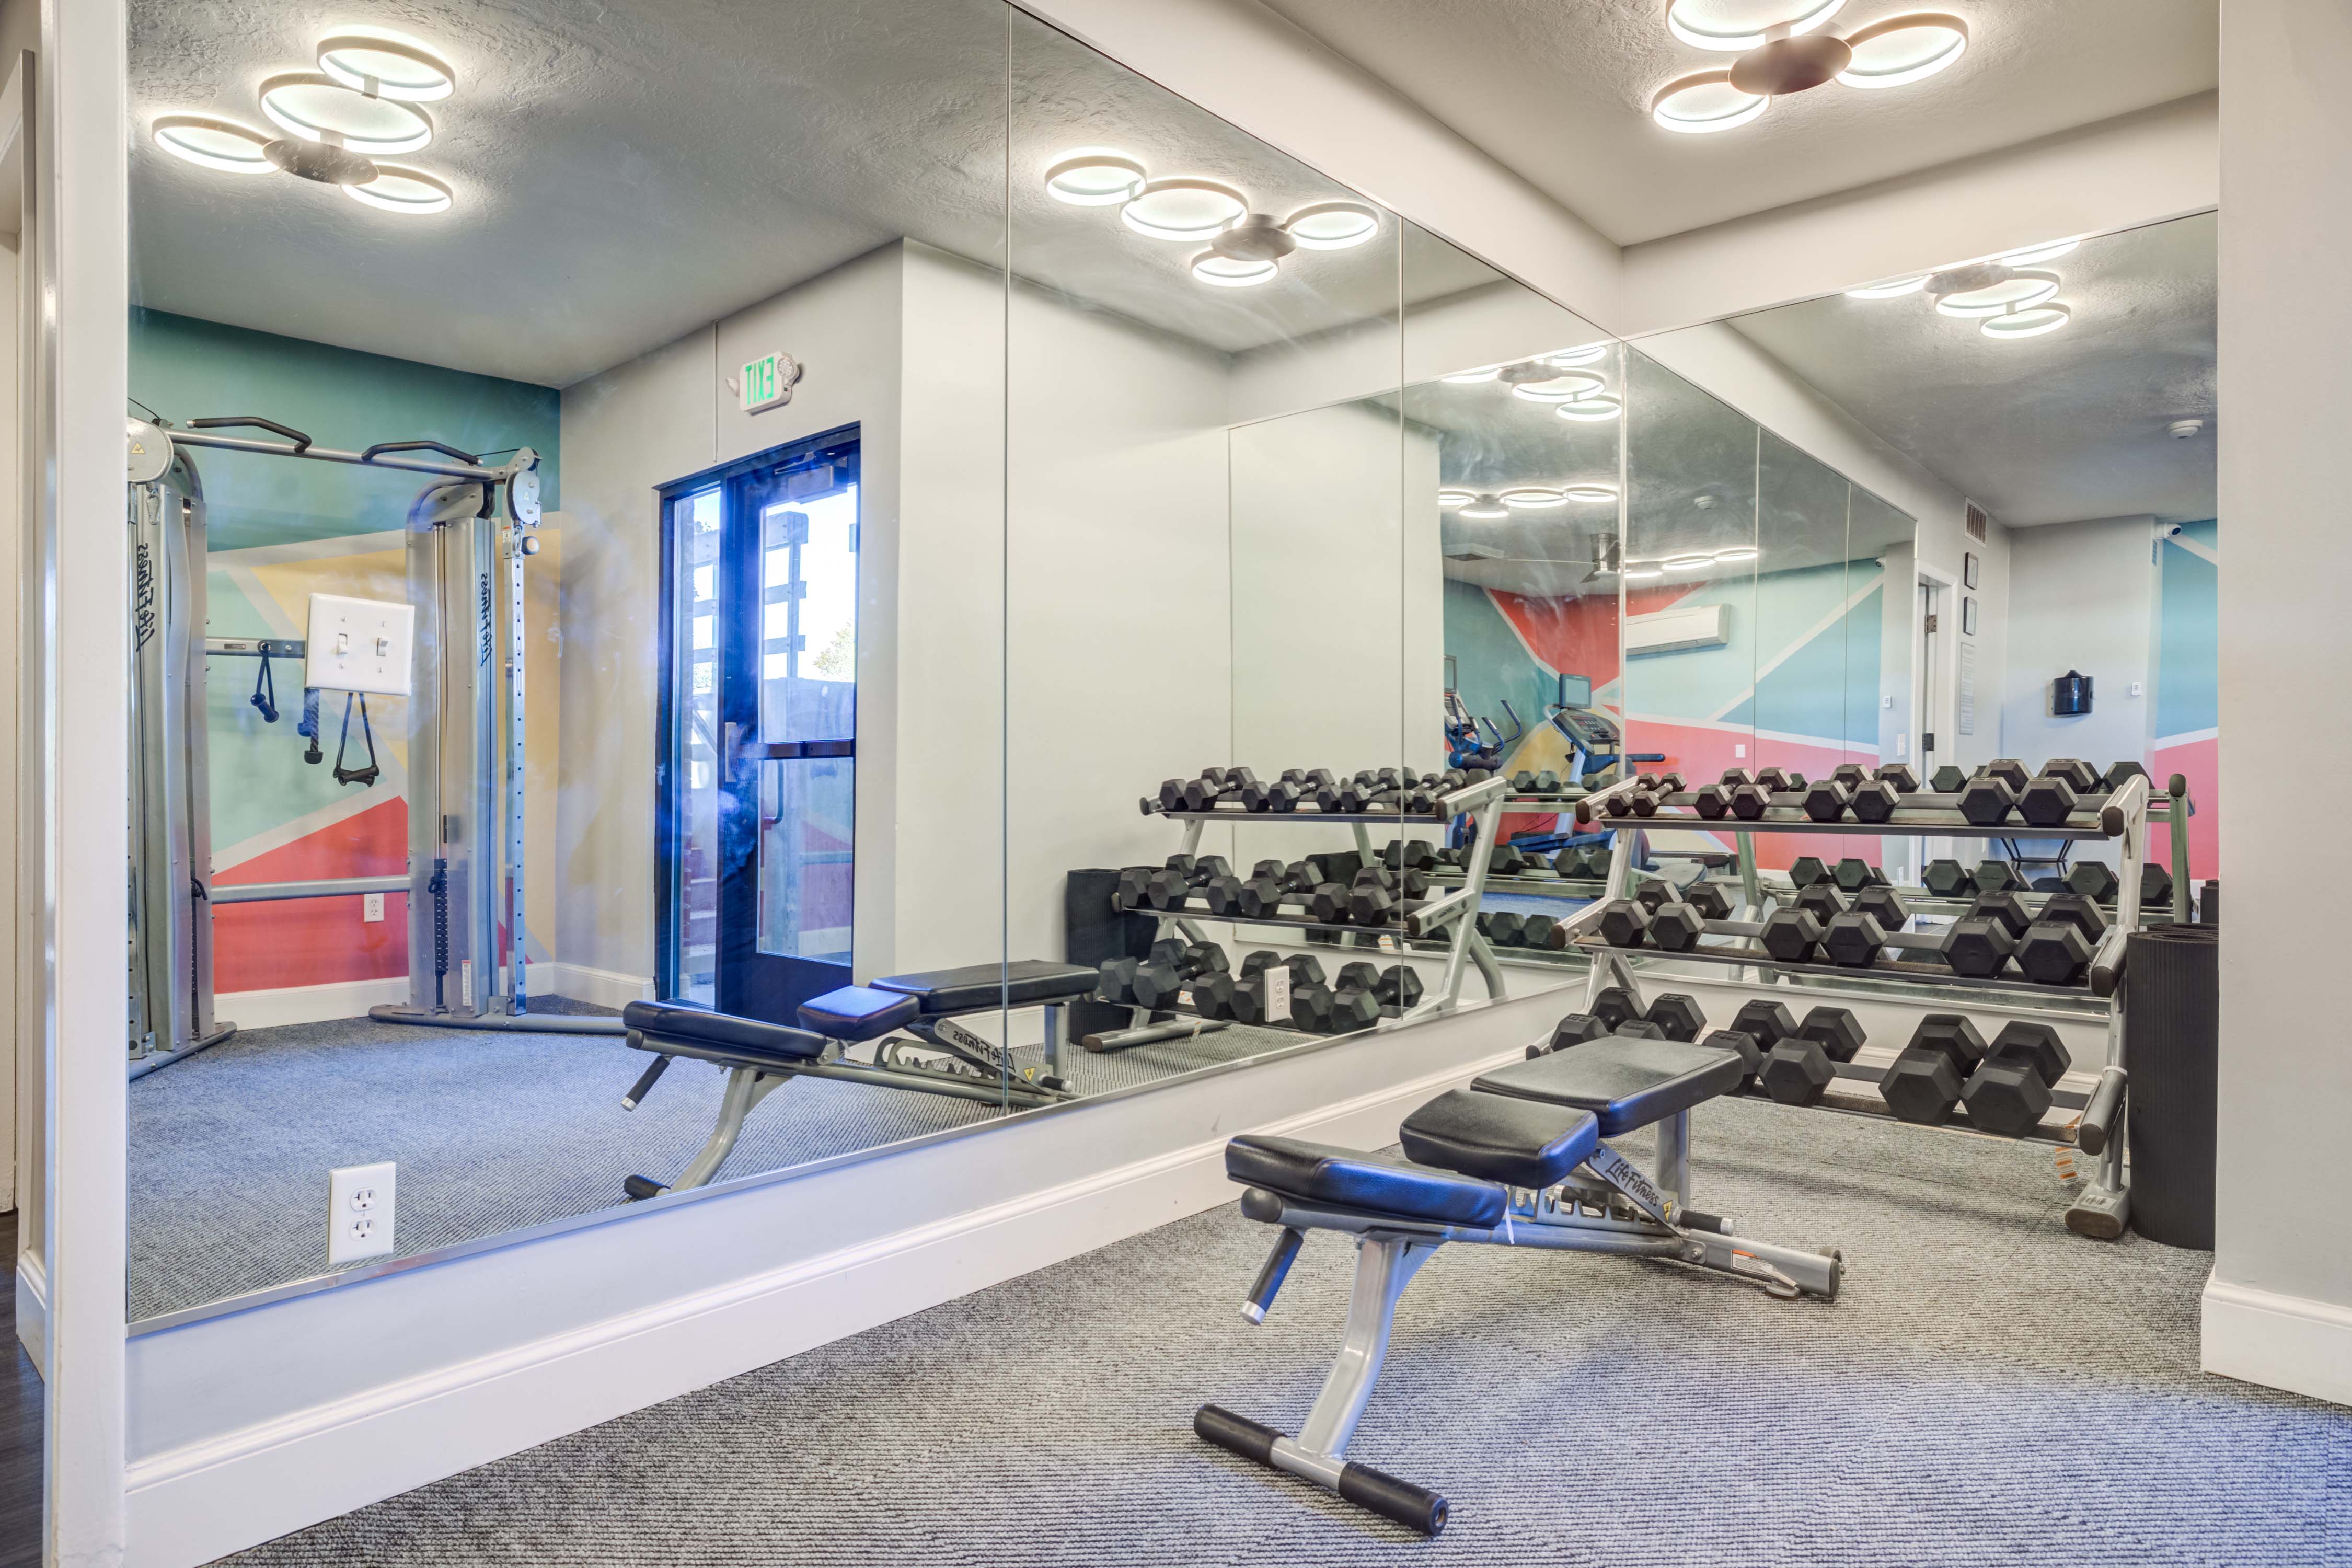 Our Apartments in Riverdale, Utah offer a Fitness Center